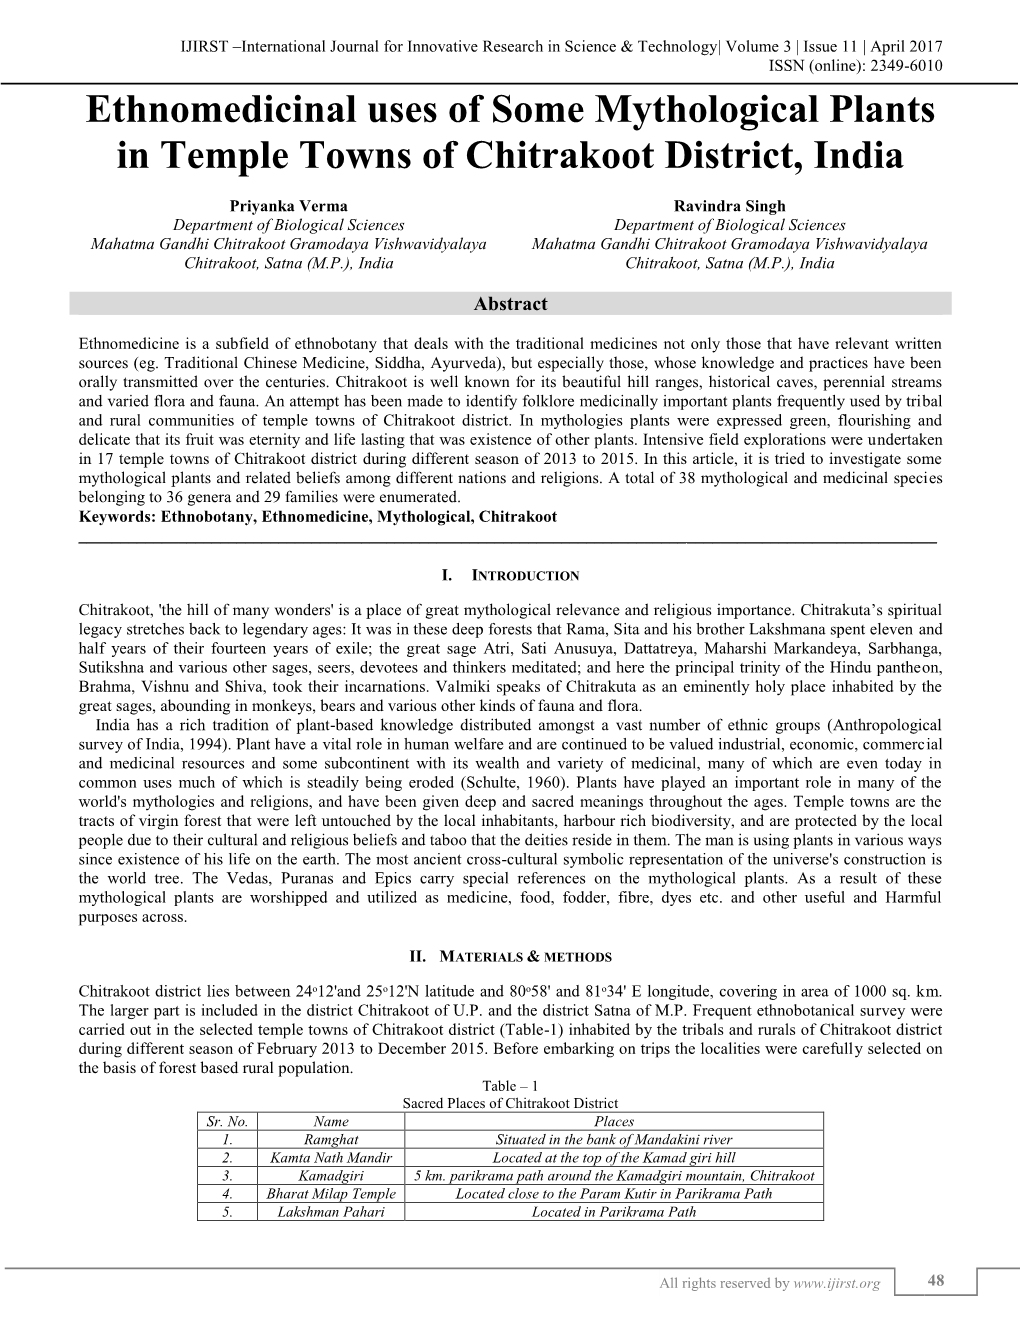 Ethnomedicinal Uses of Some Mythological Plants in Temple Towns of Chitrakoot District, India (IJIRST/ Volume 3 / Issue 11/ 008)